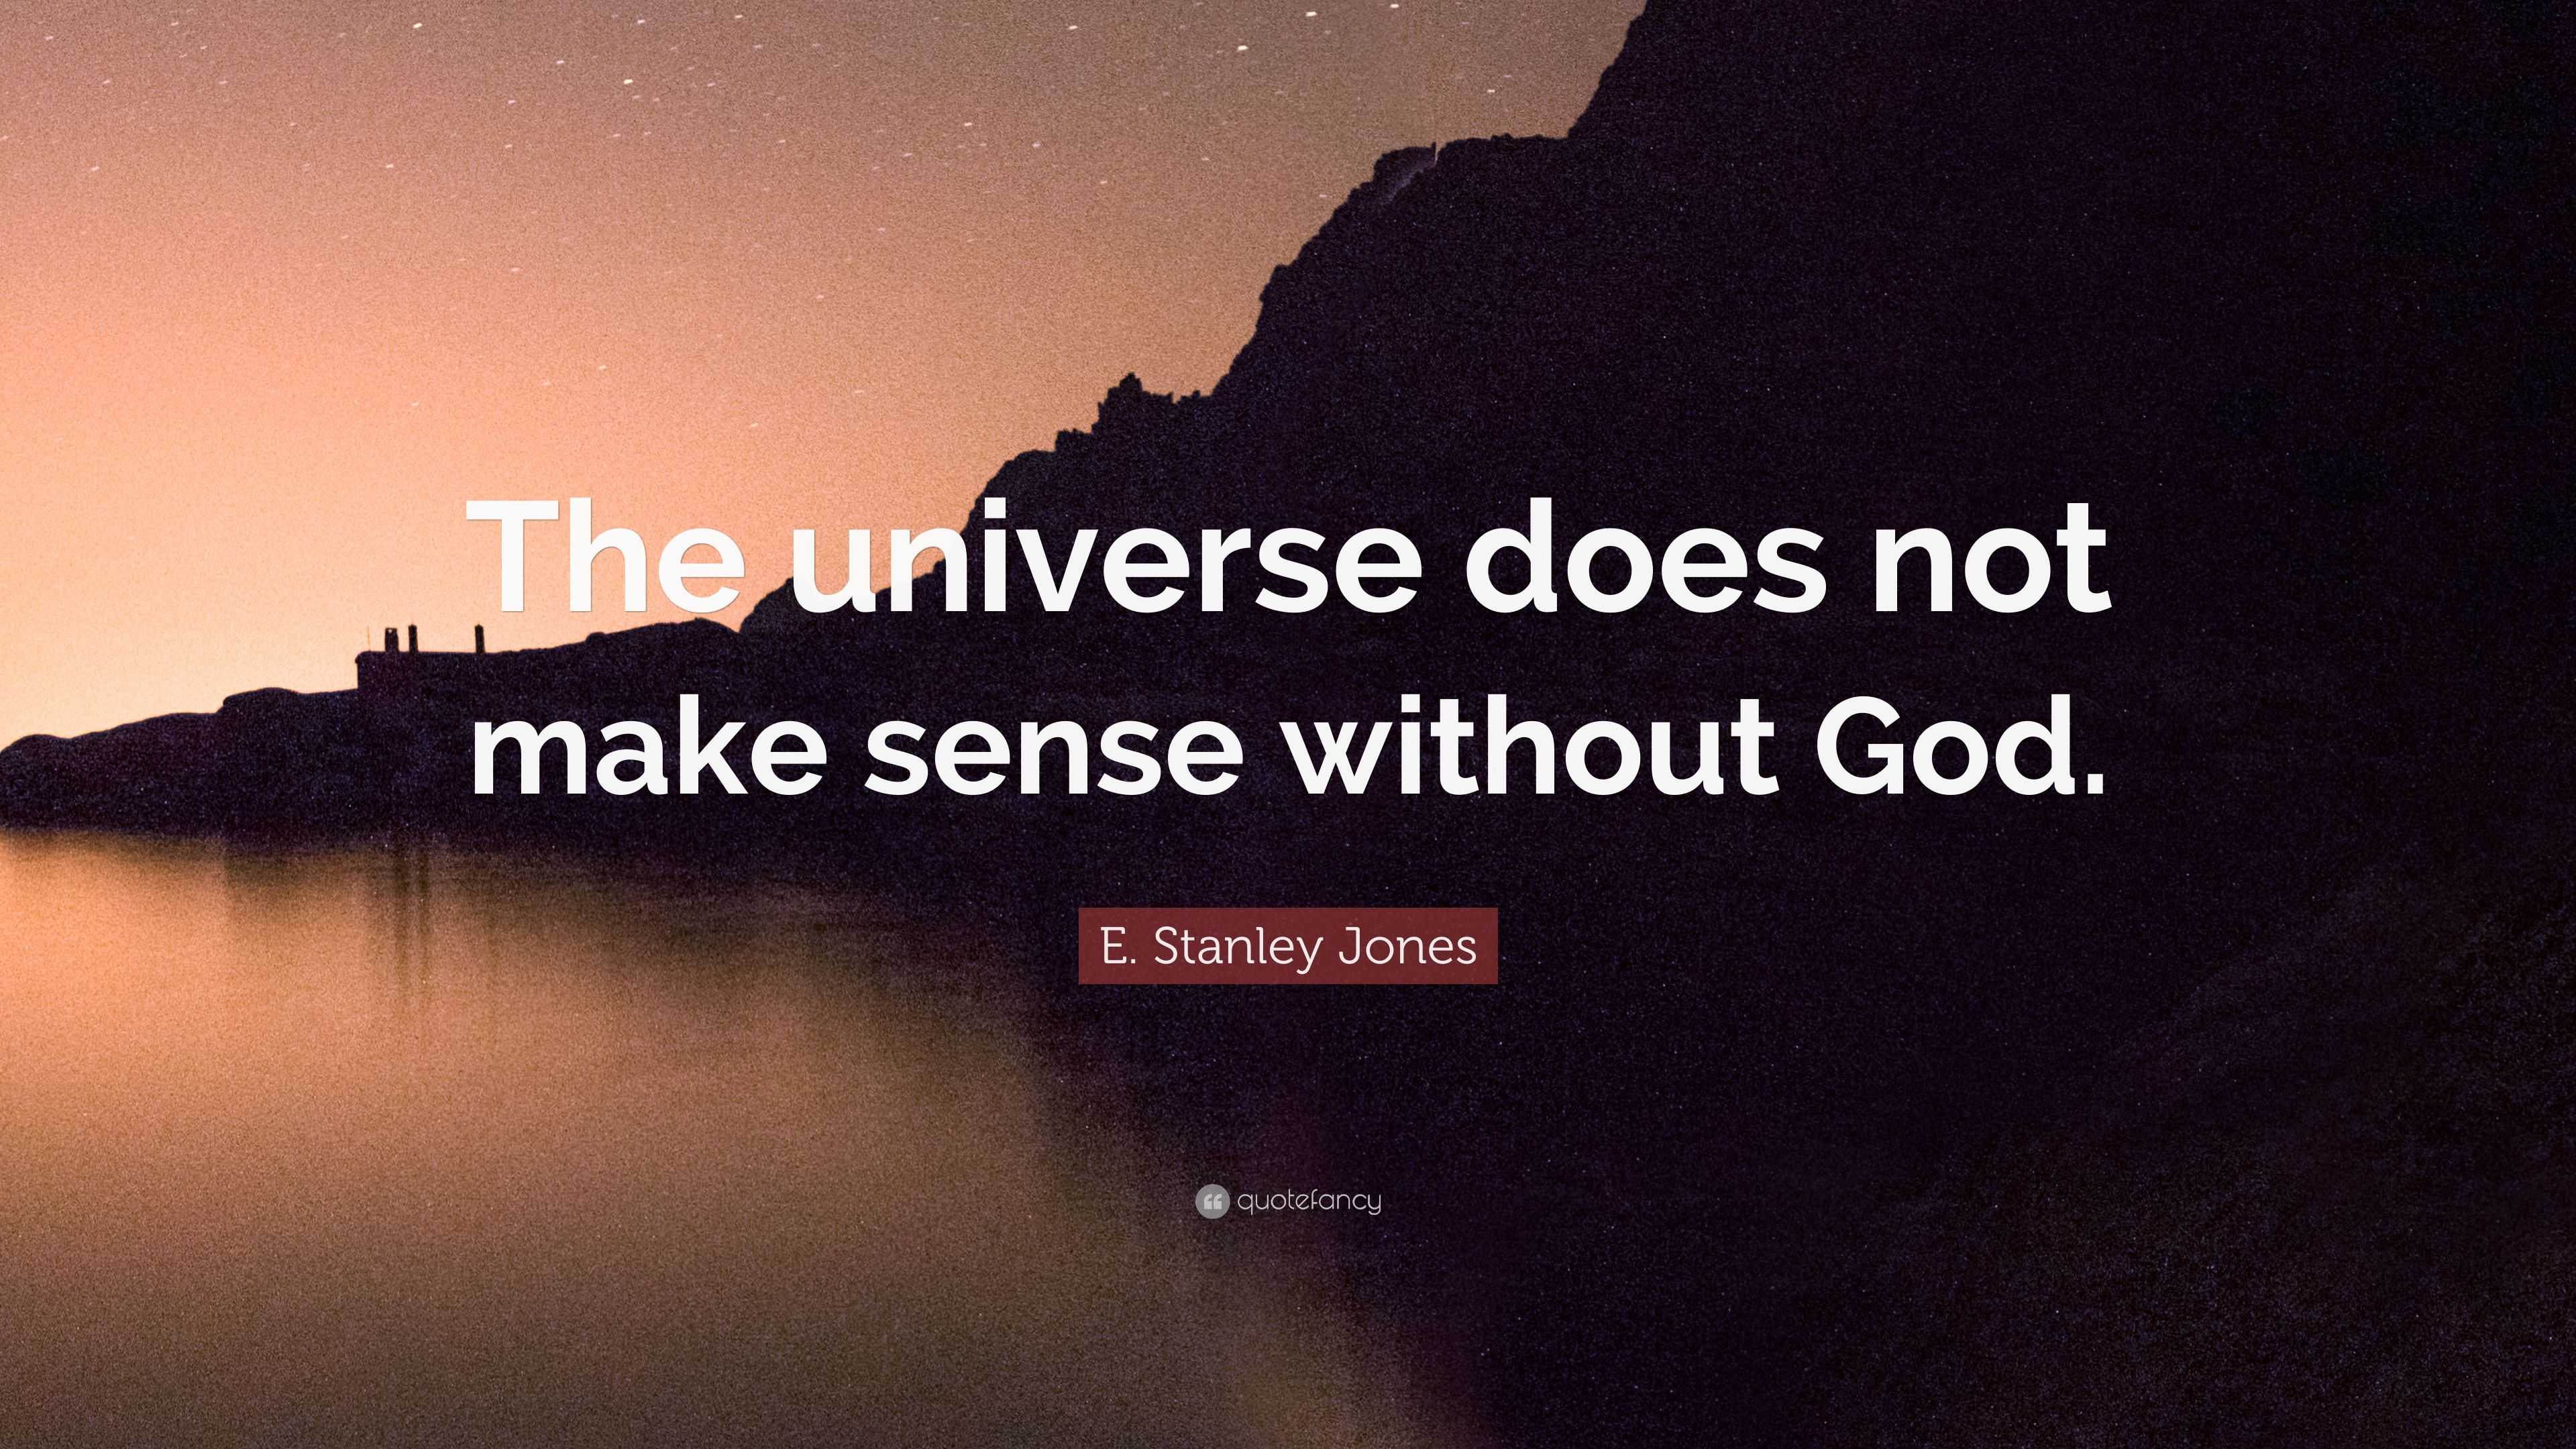 E. Stanley Jones Quote: “The universe does not make sense without God.”